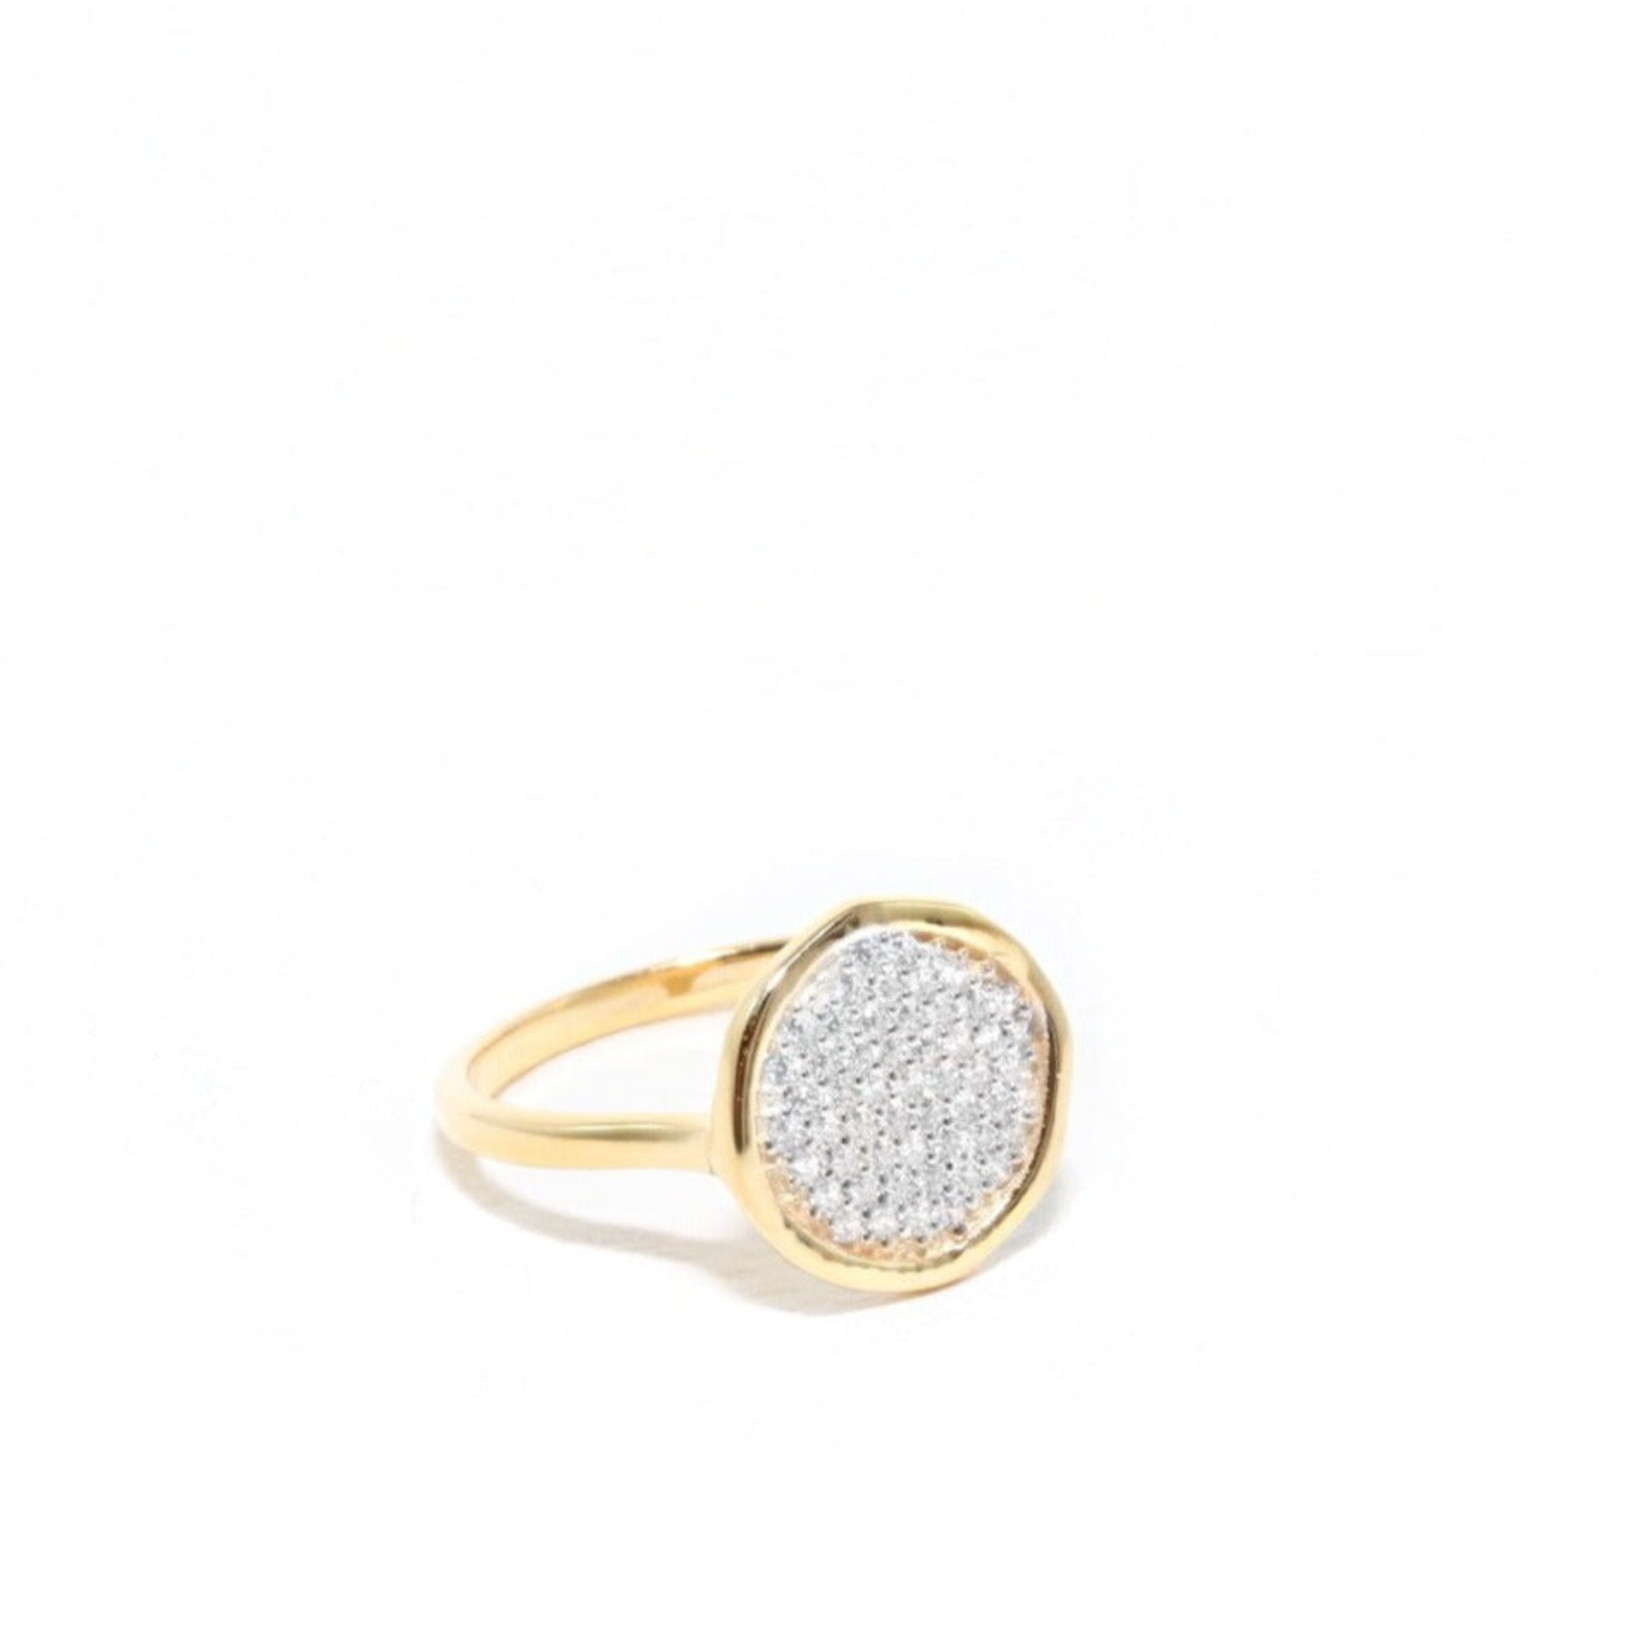 Lolo Jewellery Claire Ring - Gold - Size 7